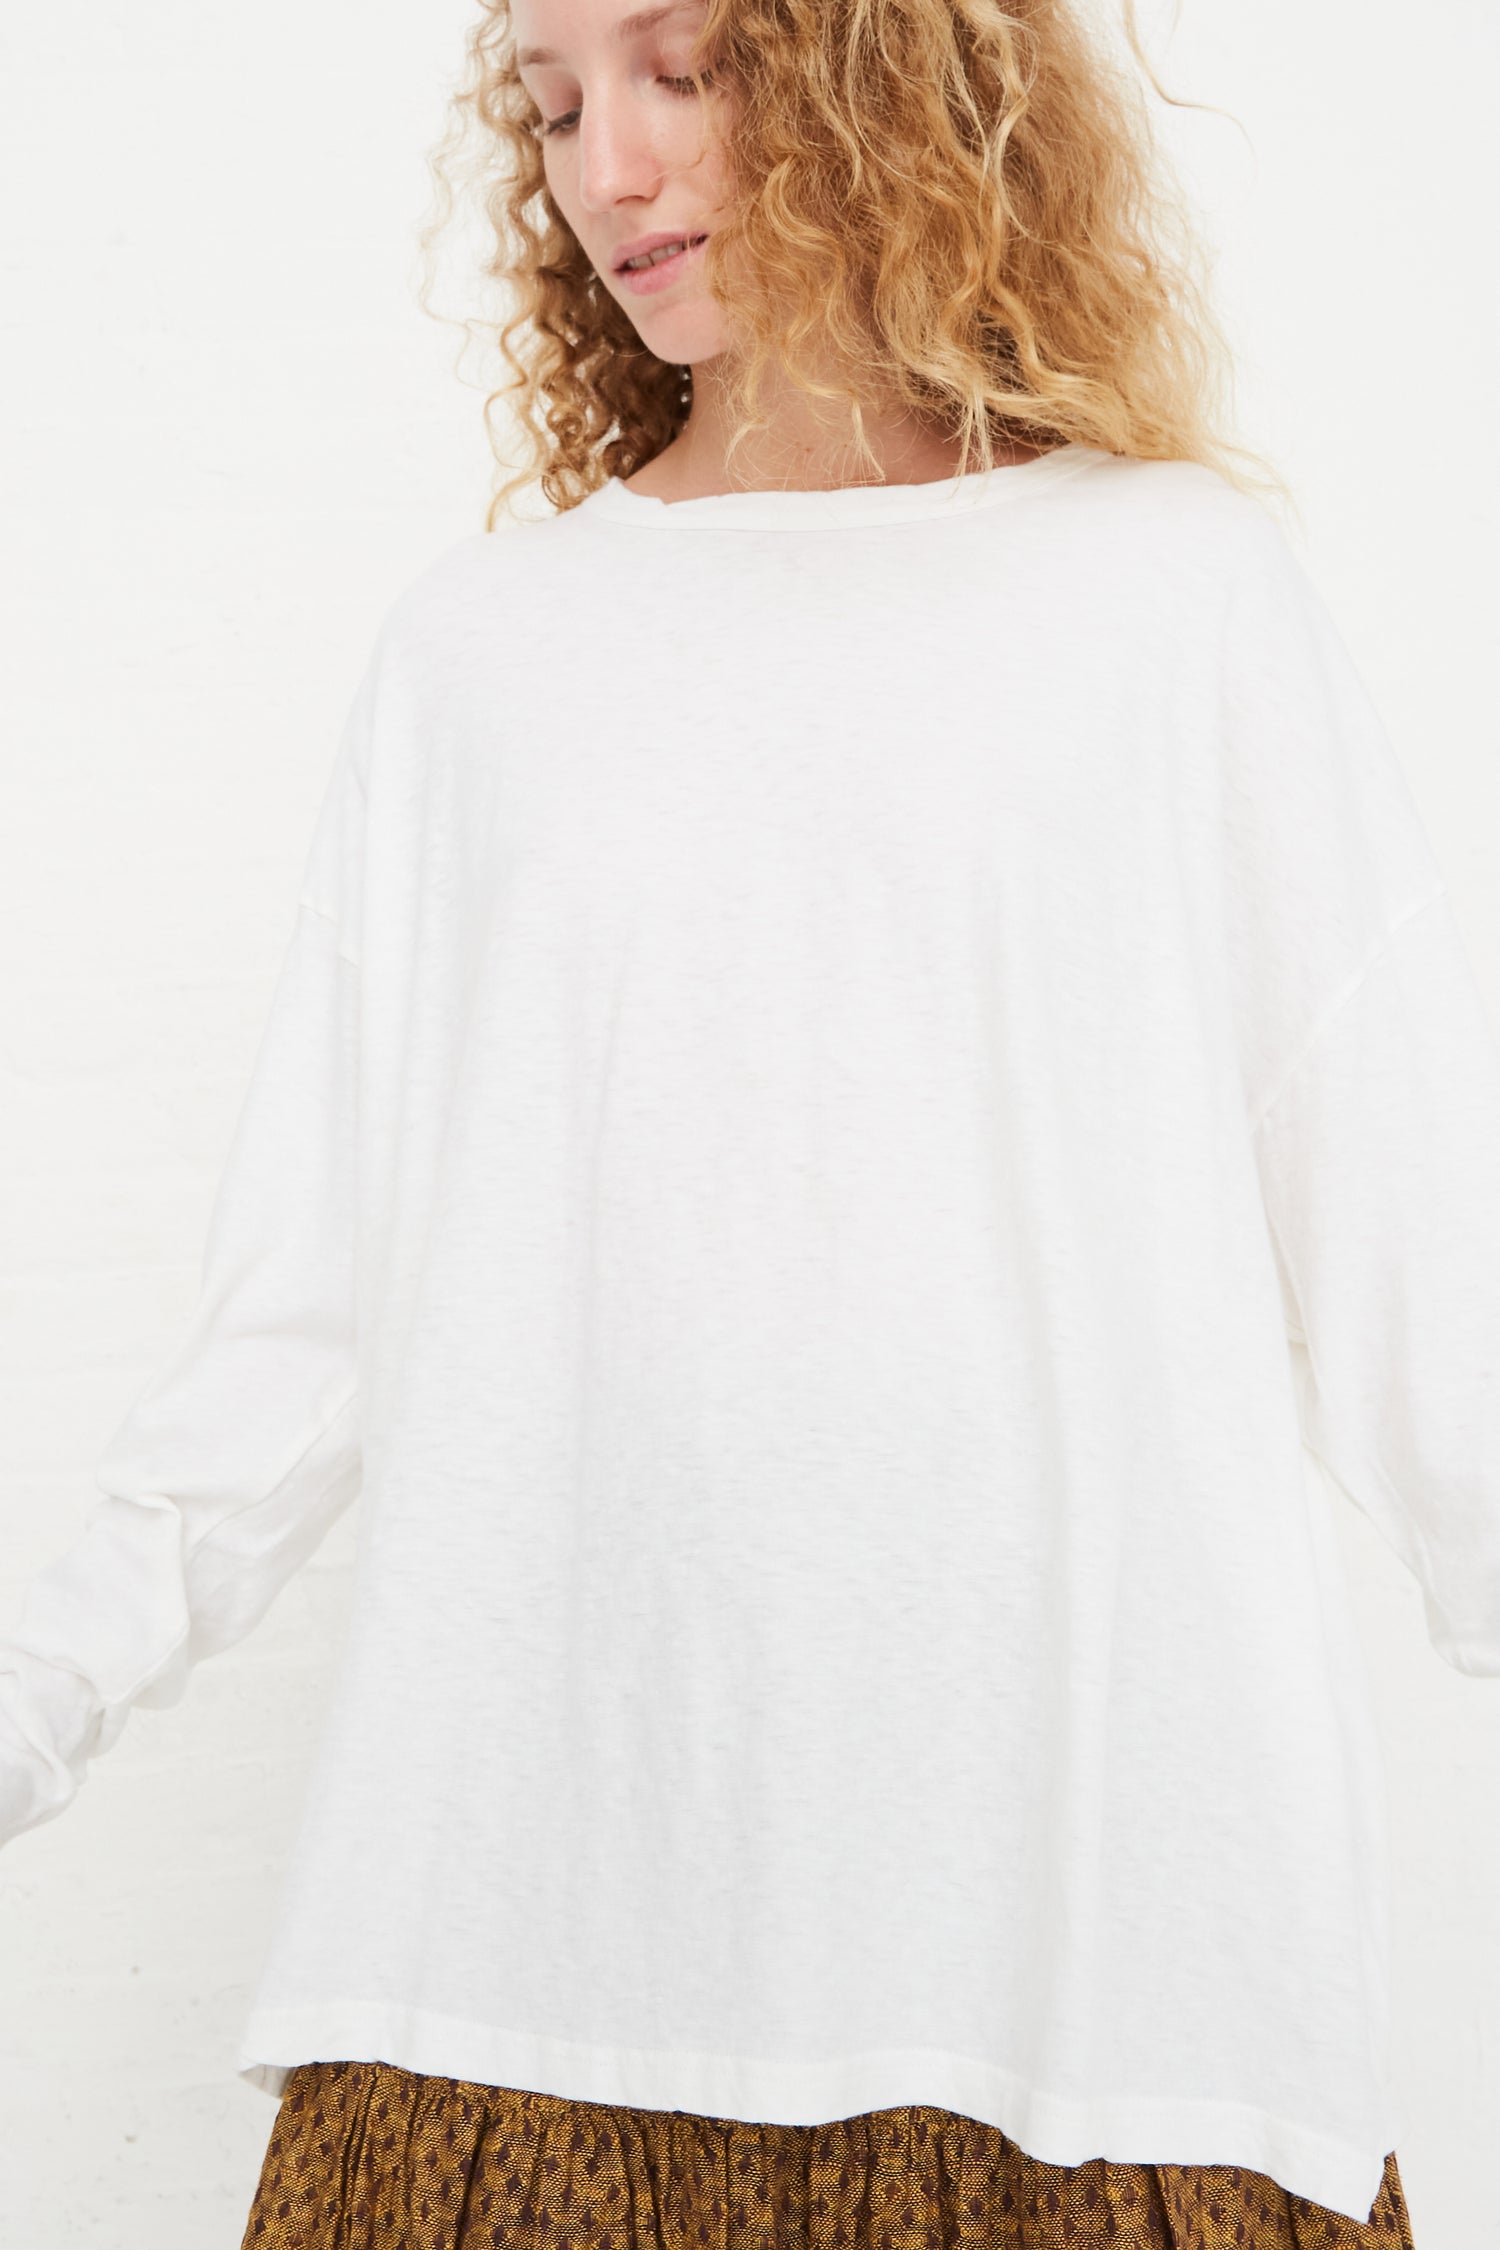 The model is wearing the Ichi Antiquités Cotton Loose Pullover in White.